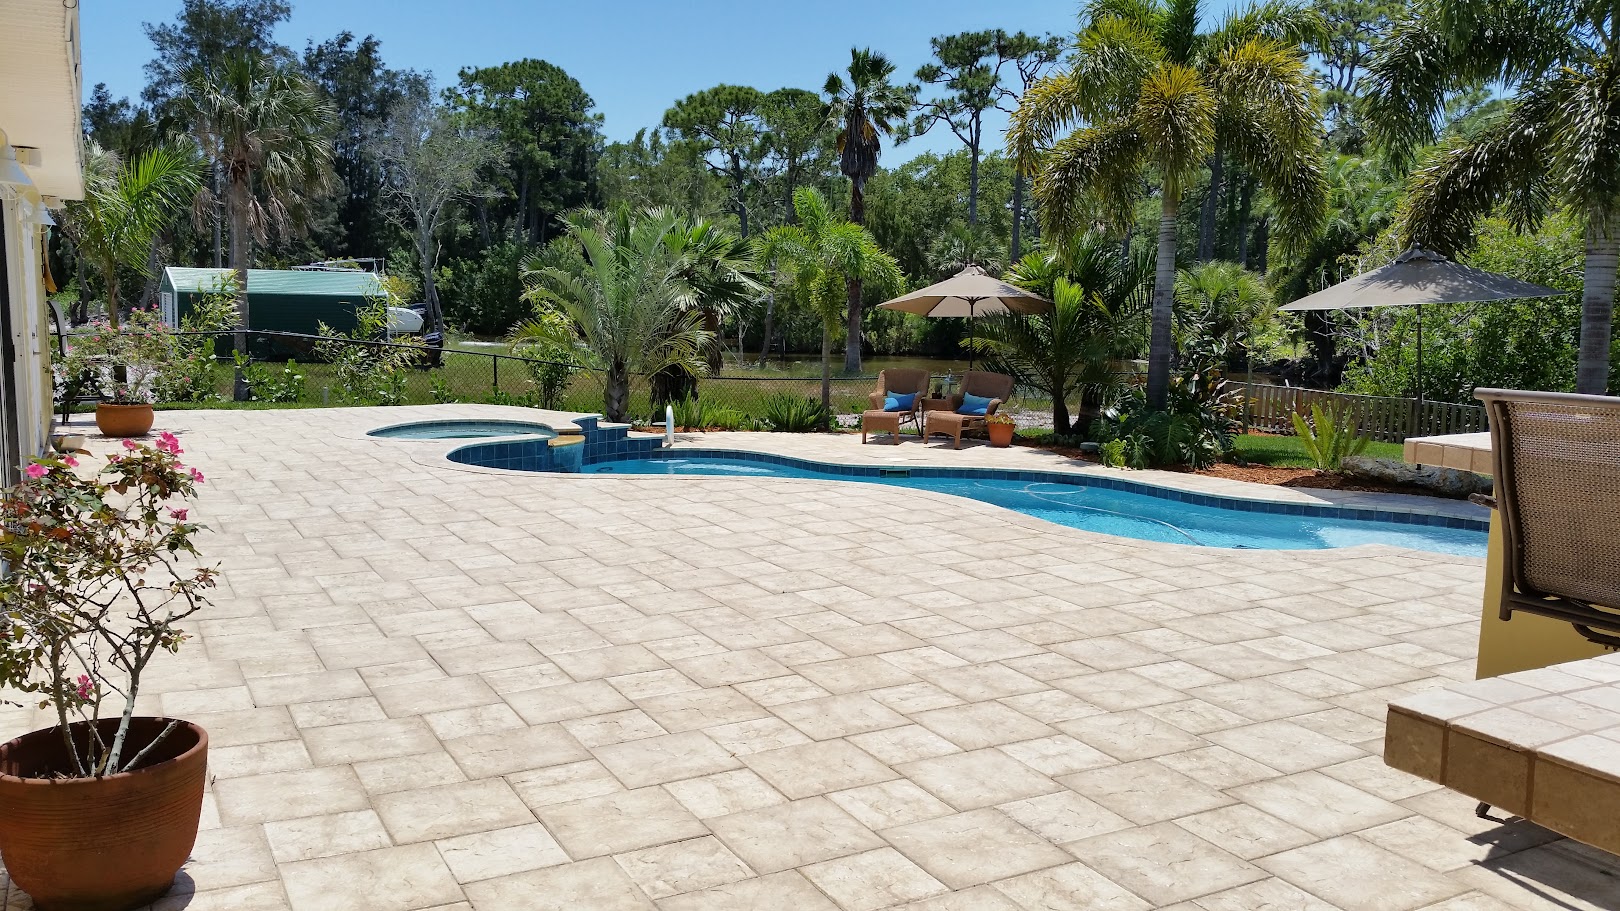 Wagner Pavers Contractor in Brevard County for over 30 years